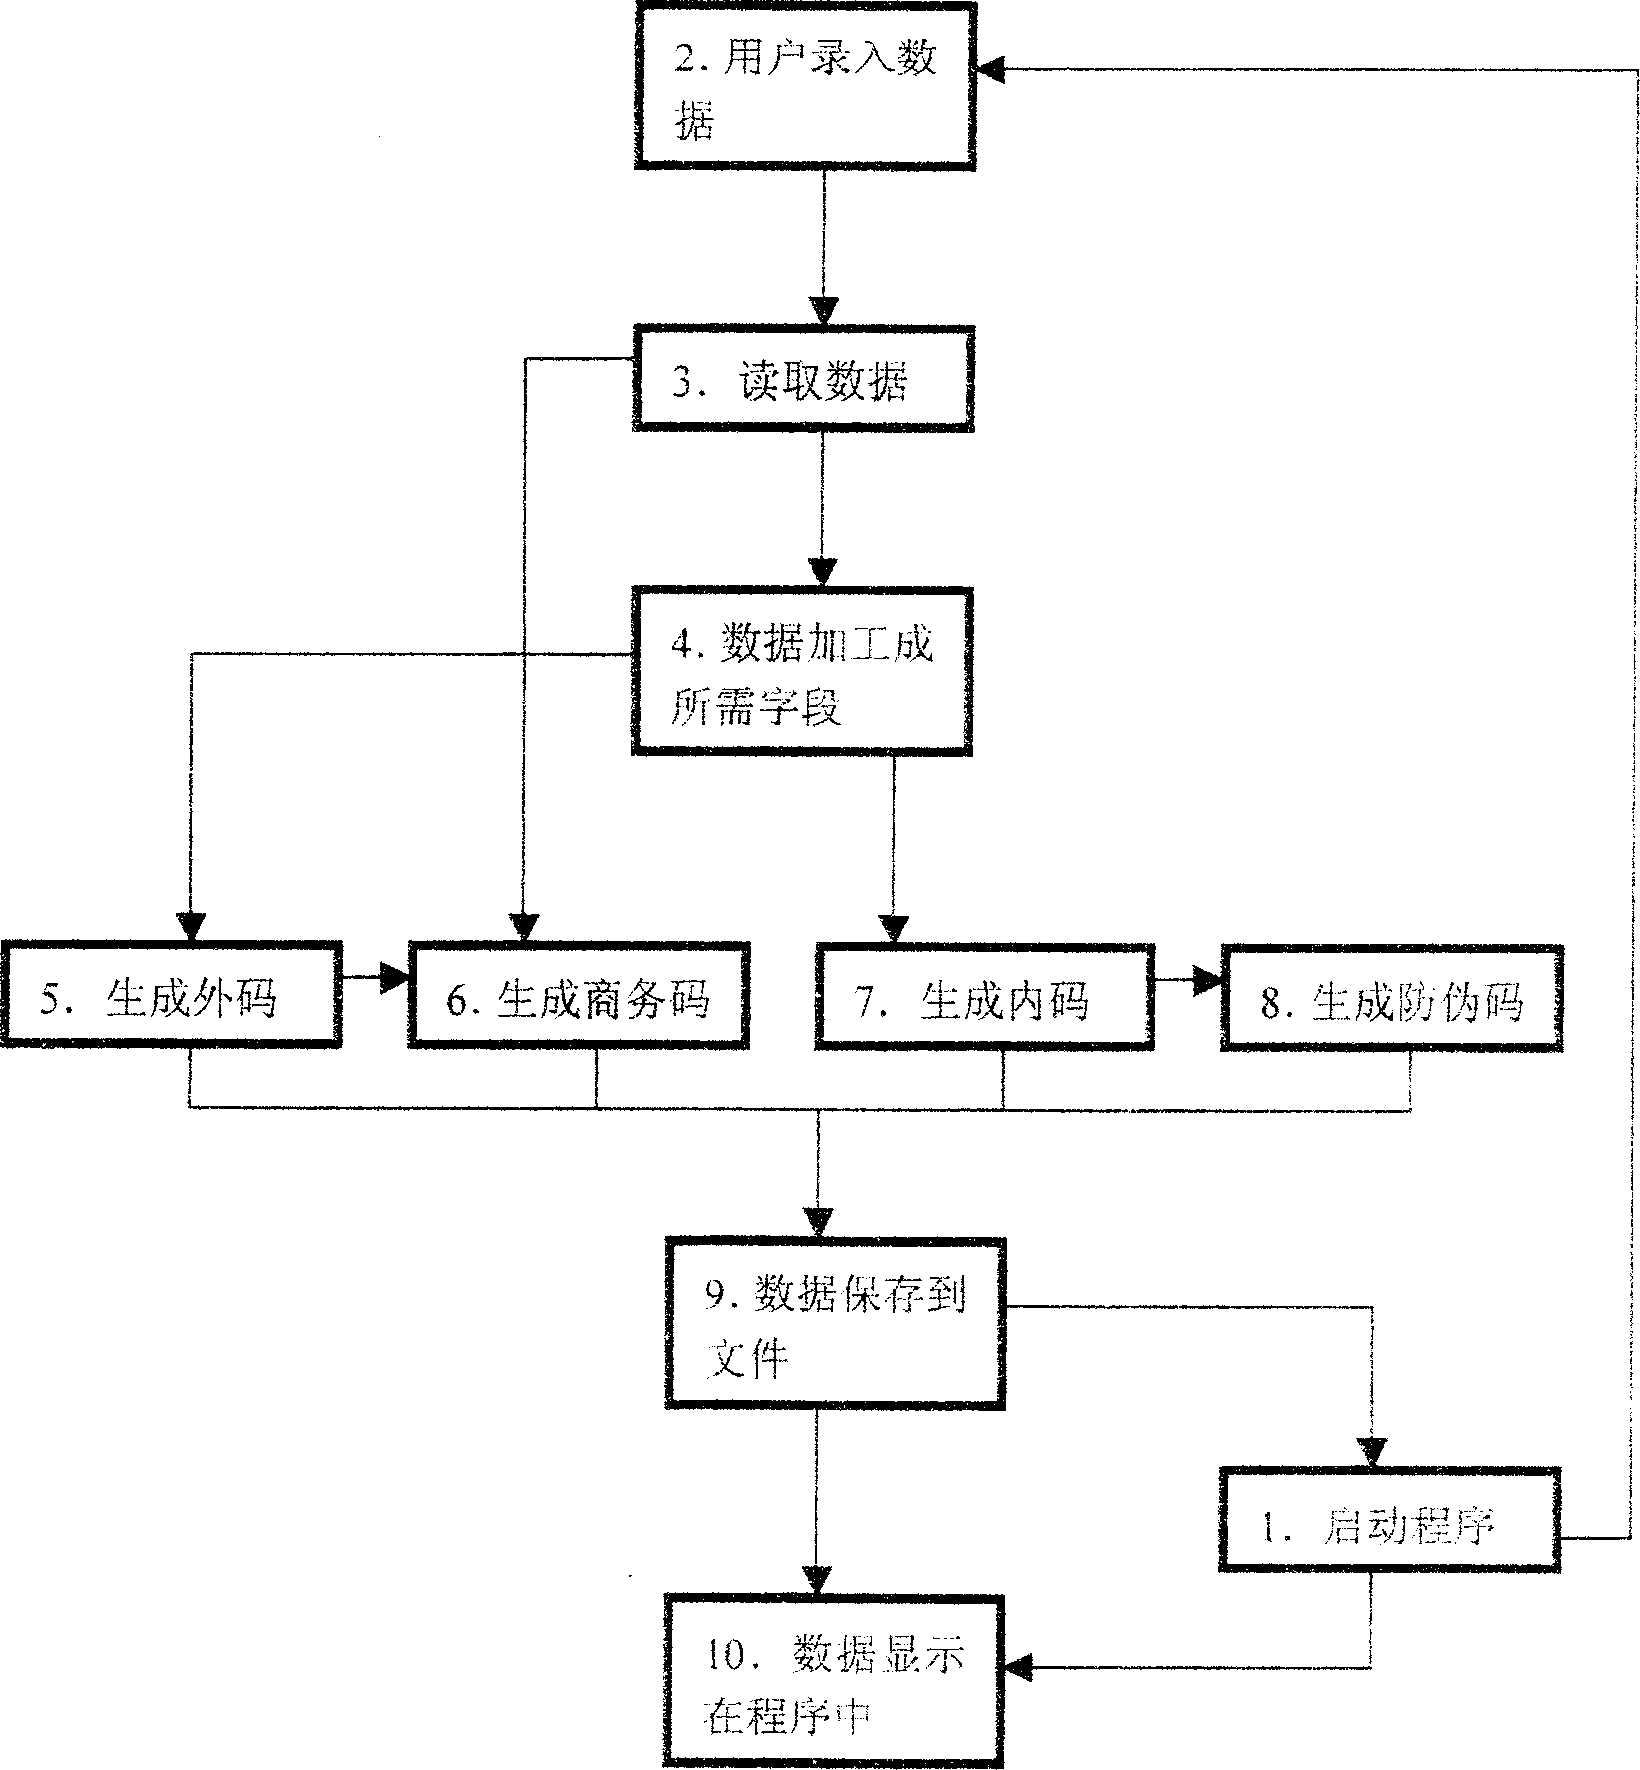 Automatic forming method for goods code